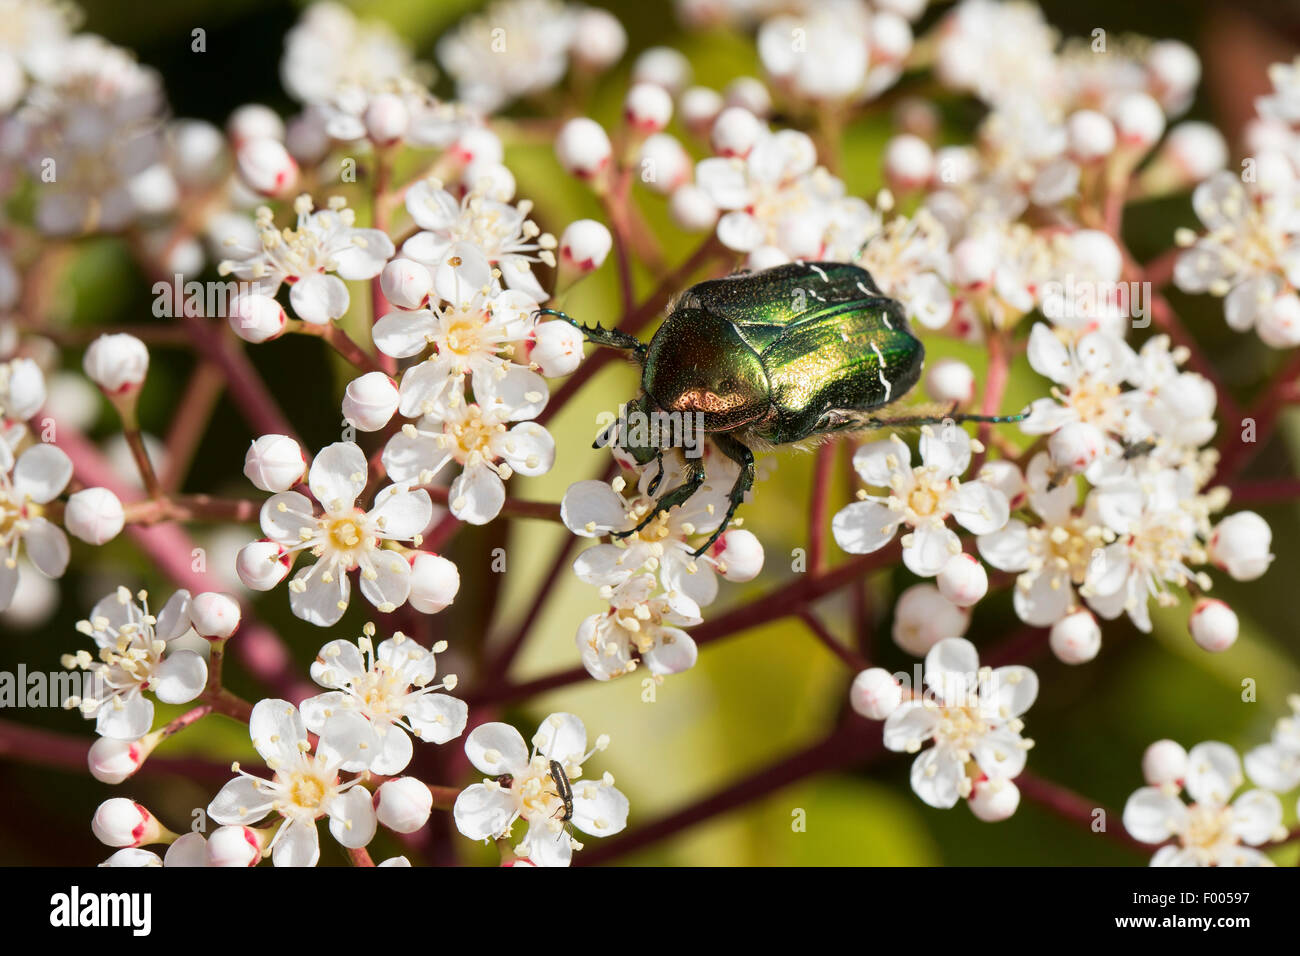 rose chafer (Cetonia aurata), on flowers, Germany Stock Photo